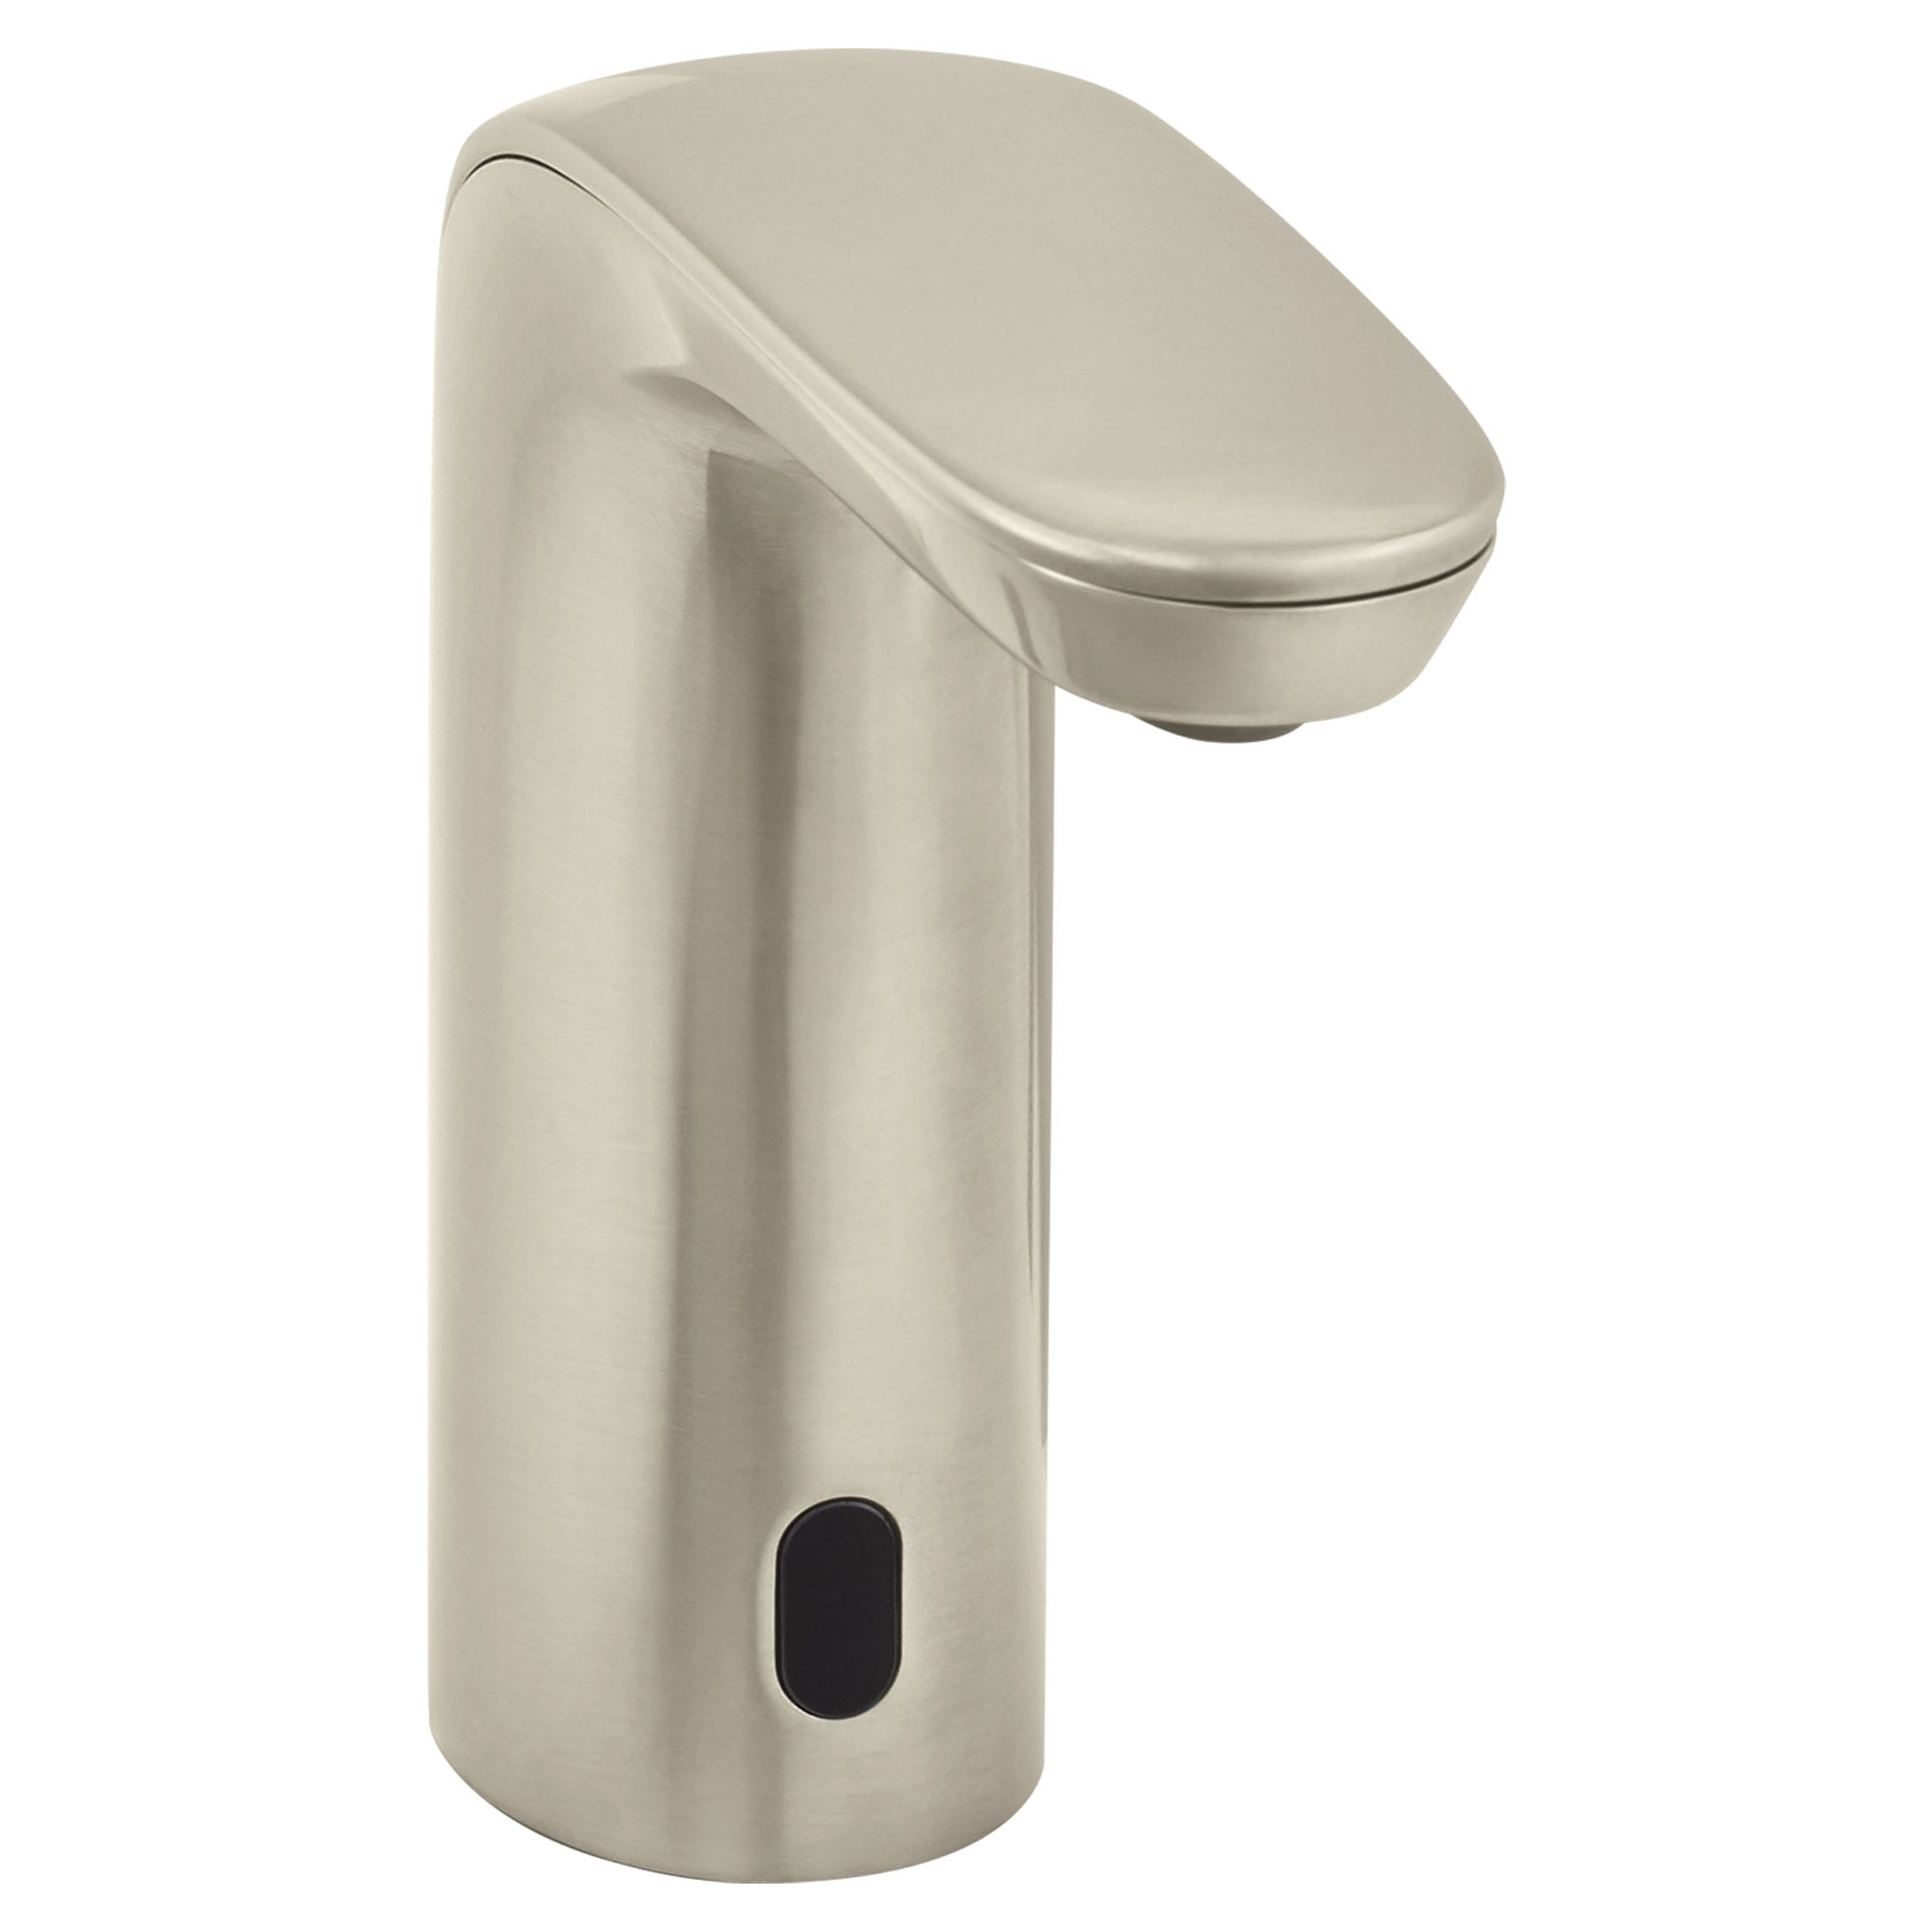 NextGen Selectronic Touchless Faucet Battery Powered 15 gpm 57 Lpm   BRUSHED NICKEL